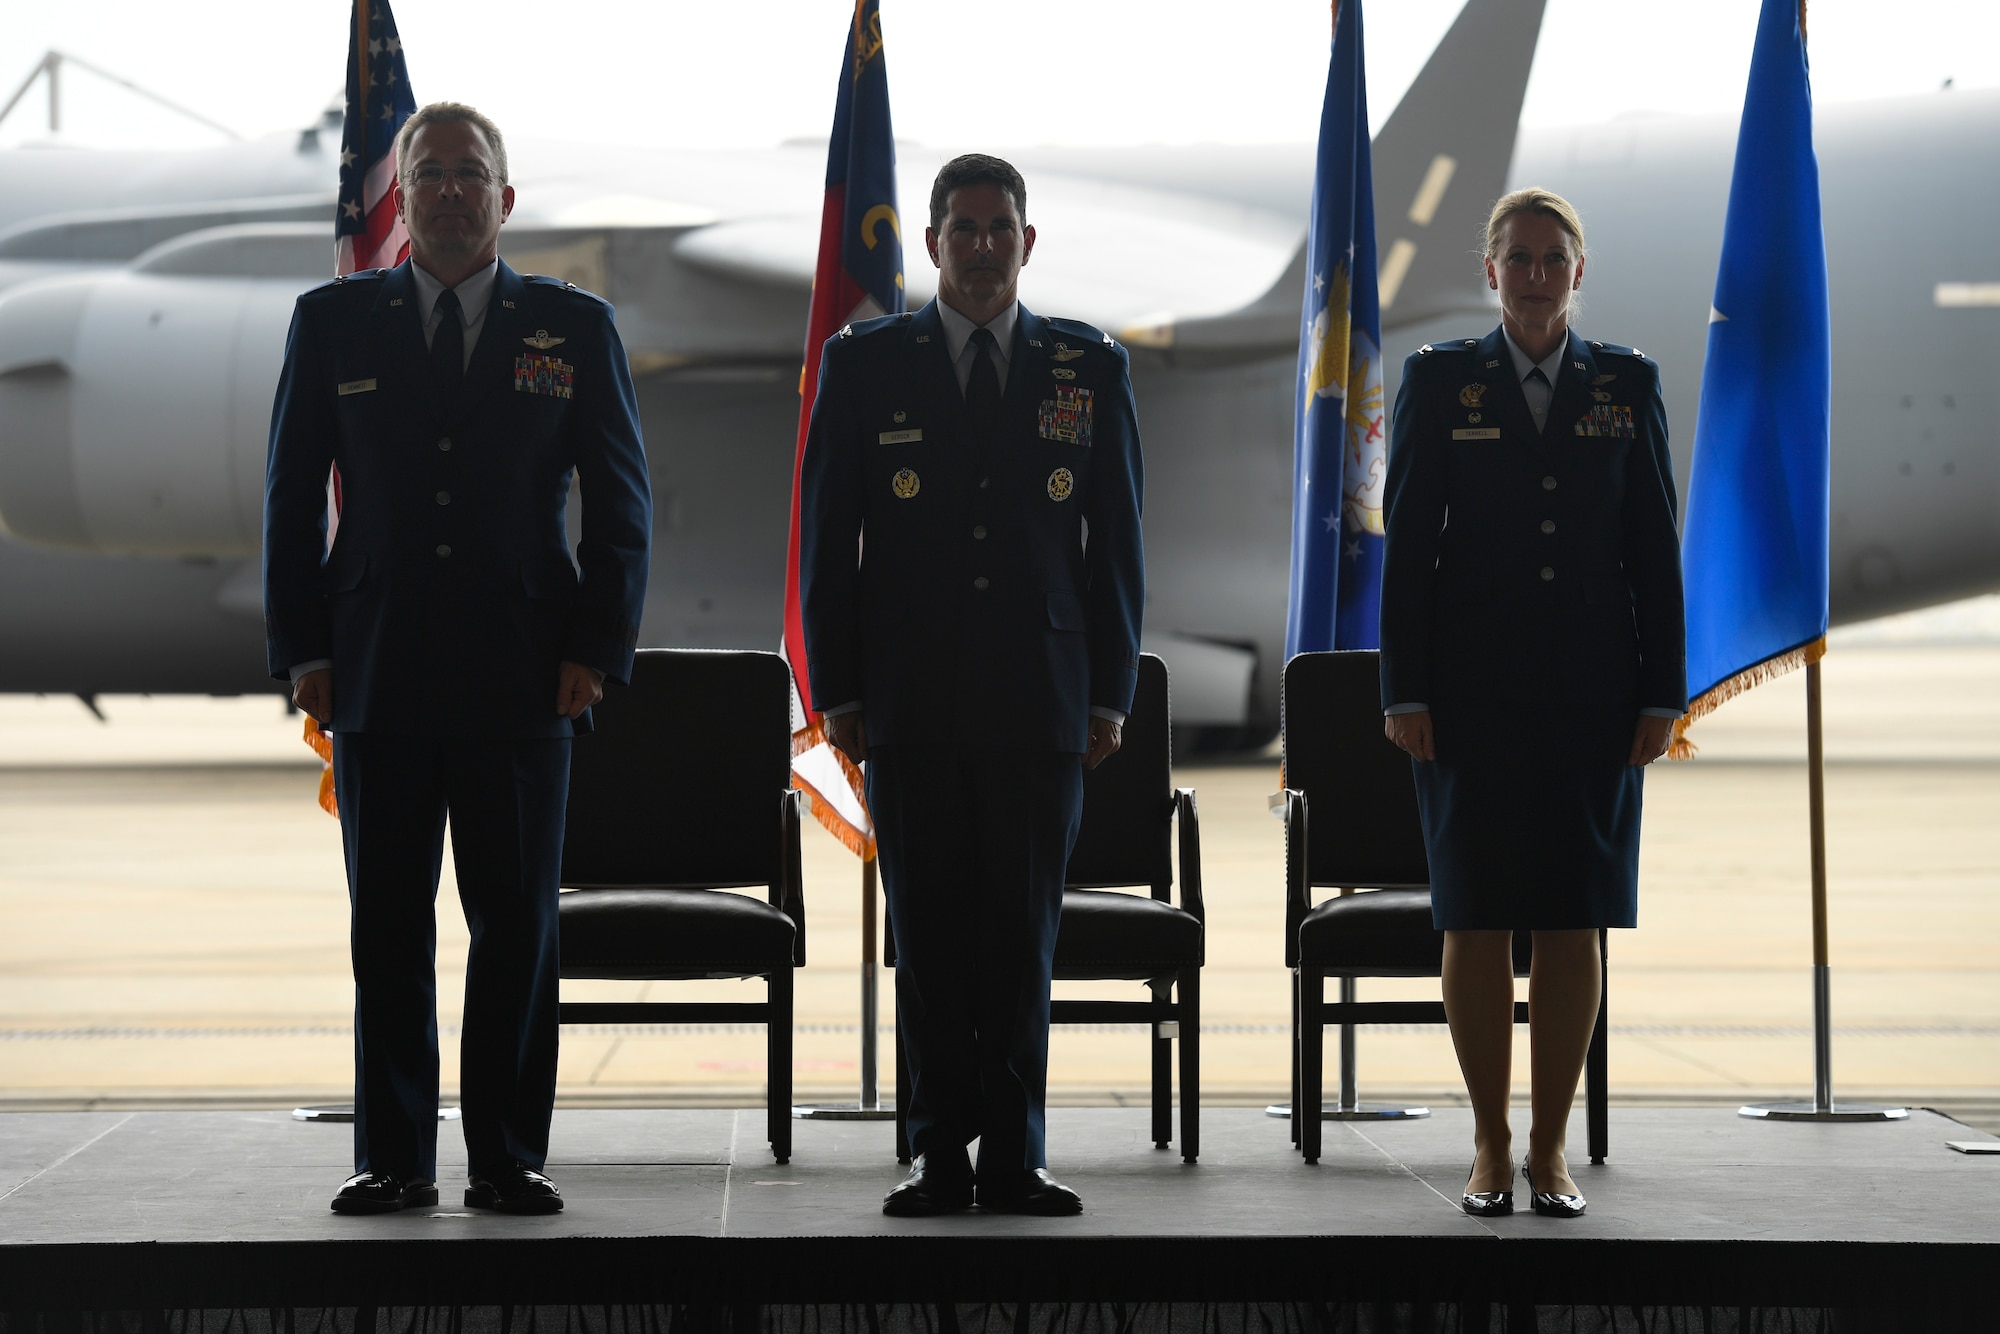 U.S. Air Force Brig. Gen. Thomas Kennett (left), Assistant Adjutant General for Air, North Carolina National Guard (NCANG), Col. Michael Gerock (center), commander of the 145th Airlift Wing (AW), and Col. Bryony Terrell (right), stand at attention prior to the passing of the guide-on which signifies the official change of command held at the NCANG Base, Charlotte Douglas International Airport, June 9, 2018. Gerock will relinquish command to Col. Bryony Terrell who will be the the first female commander for the 145th AW.